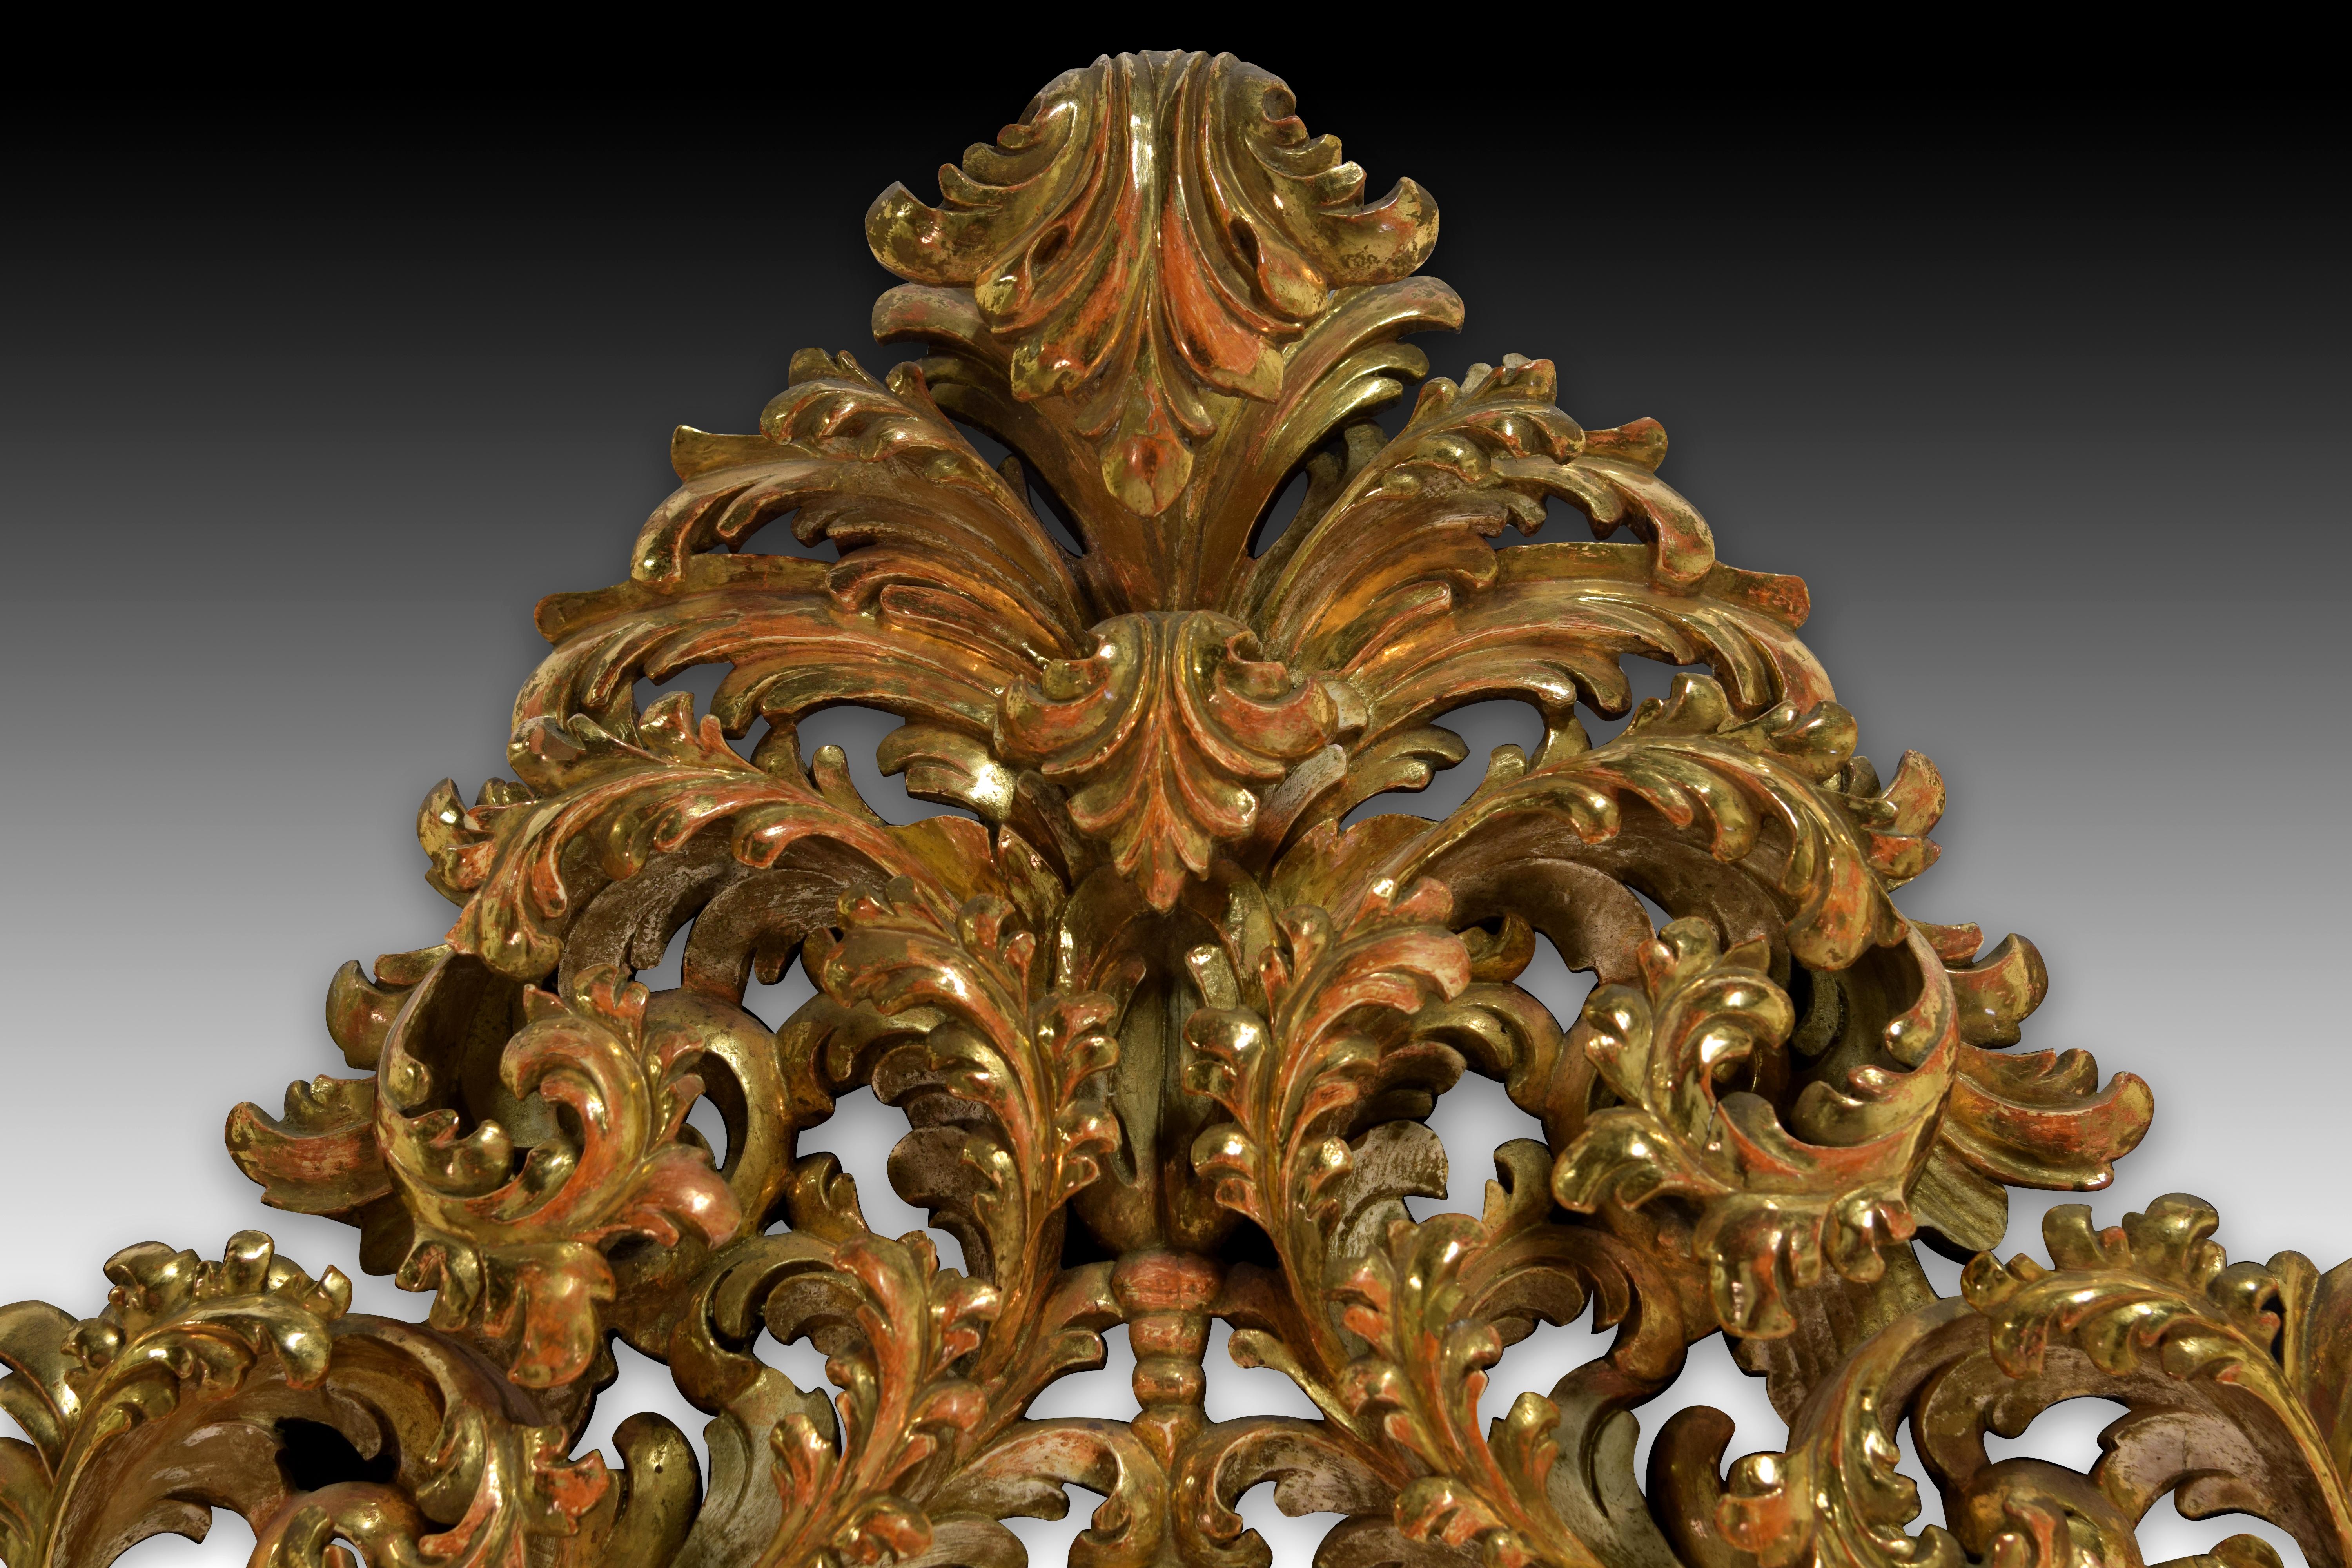 Oval mirror. Carved wood, glass. XIX century. 
Oval mirror with a carved and gilded wood frame formed by a simple and smooth molding towards the interior and a complicated but symmetrical openwork composition with a scallop shell and decorative